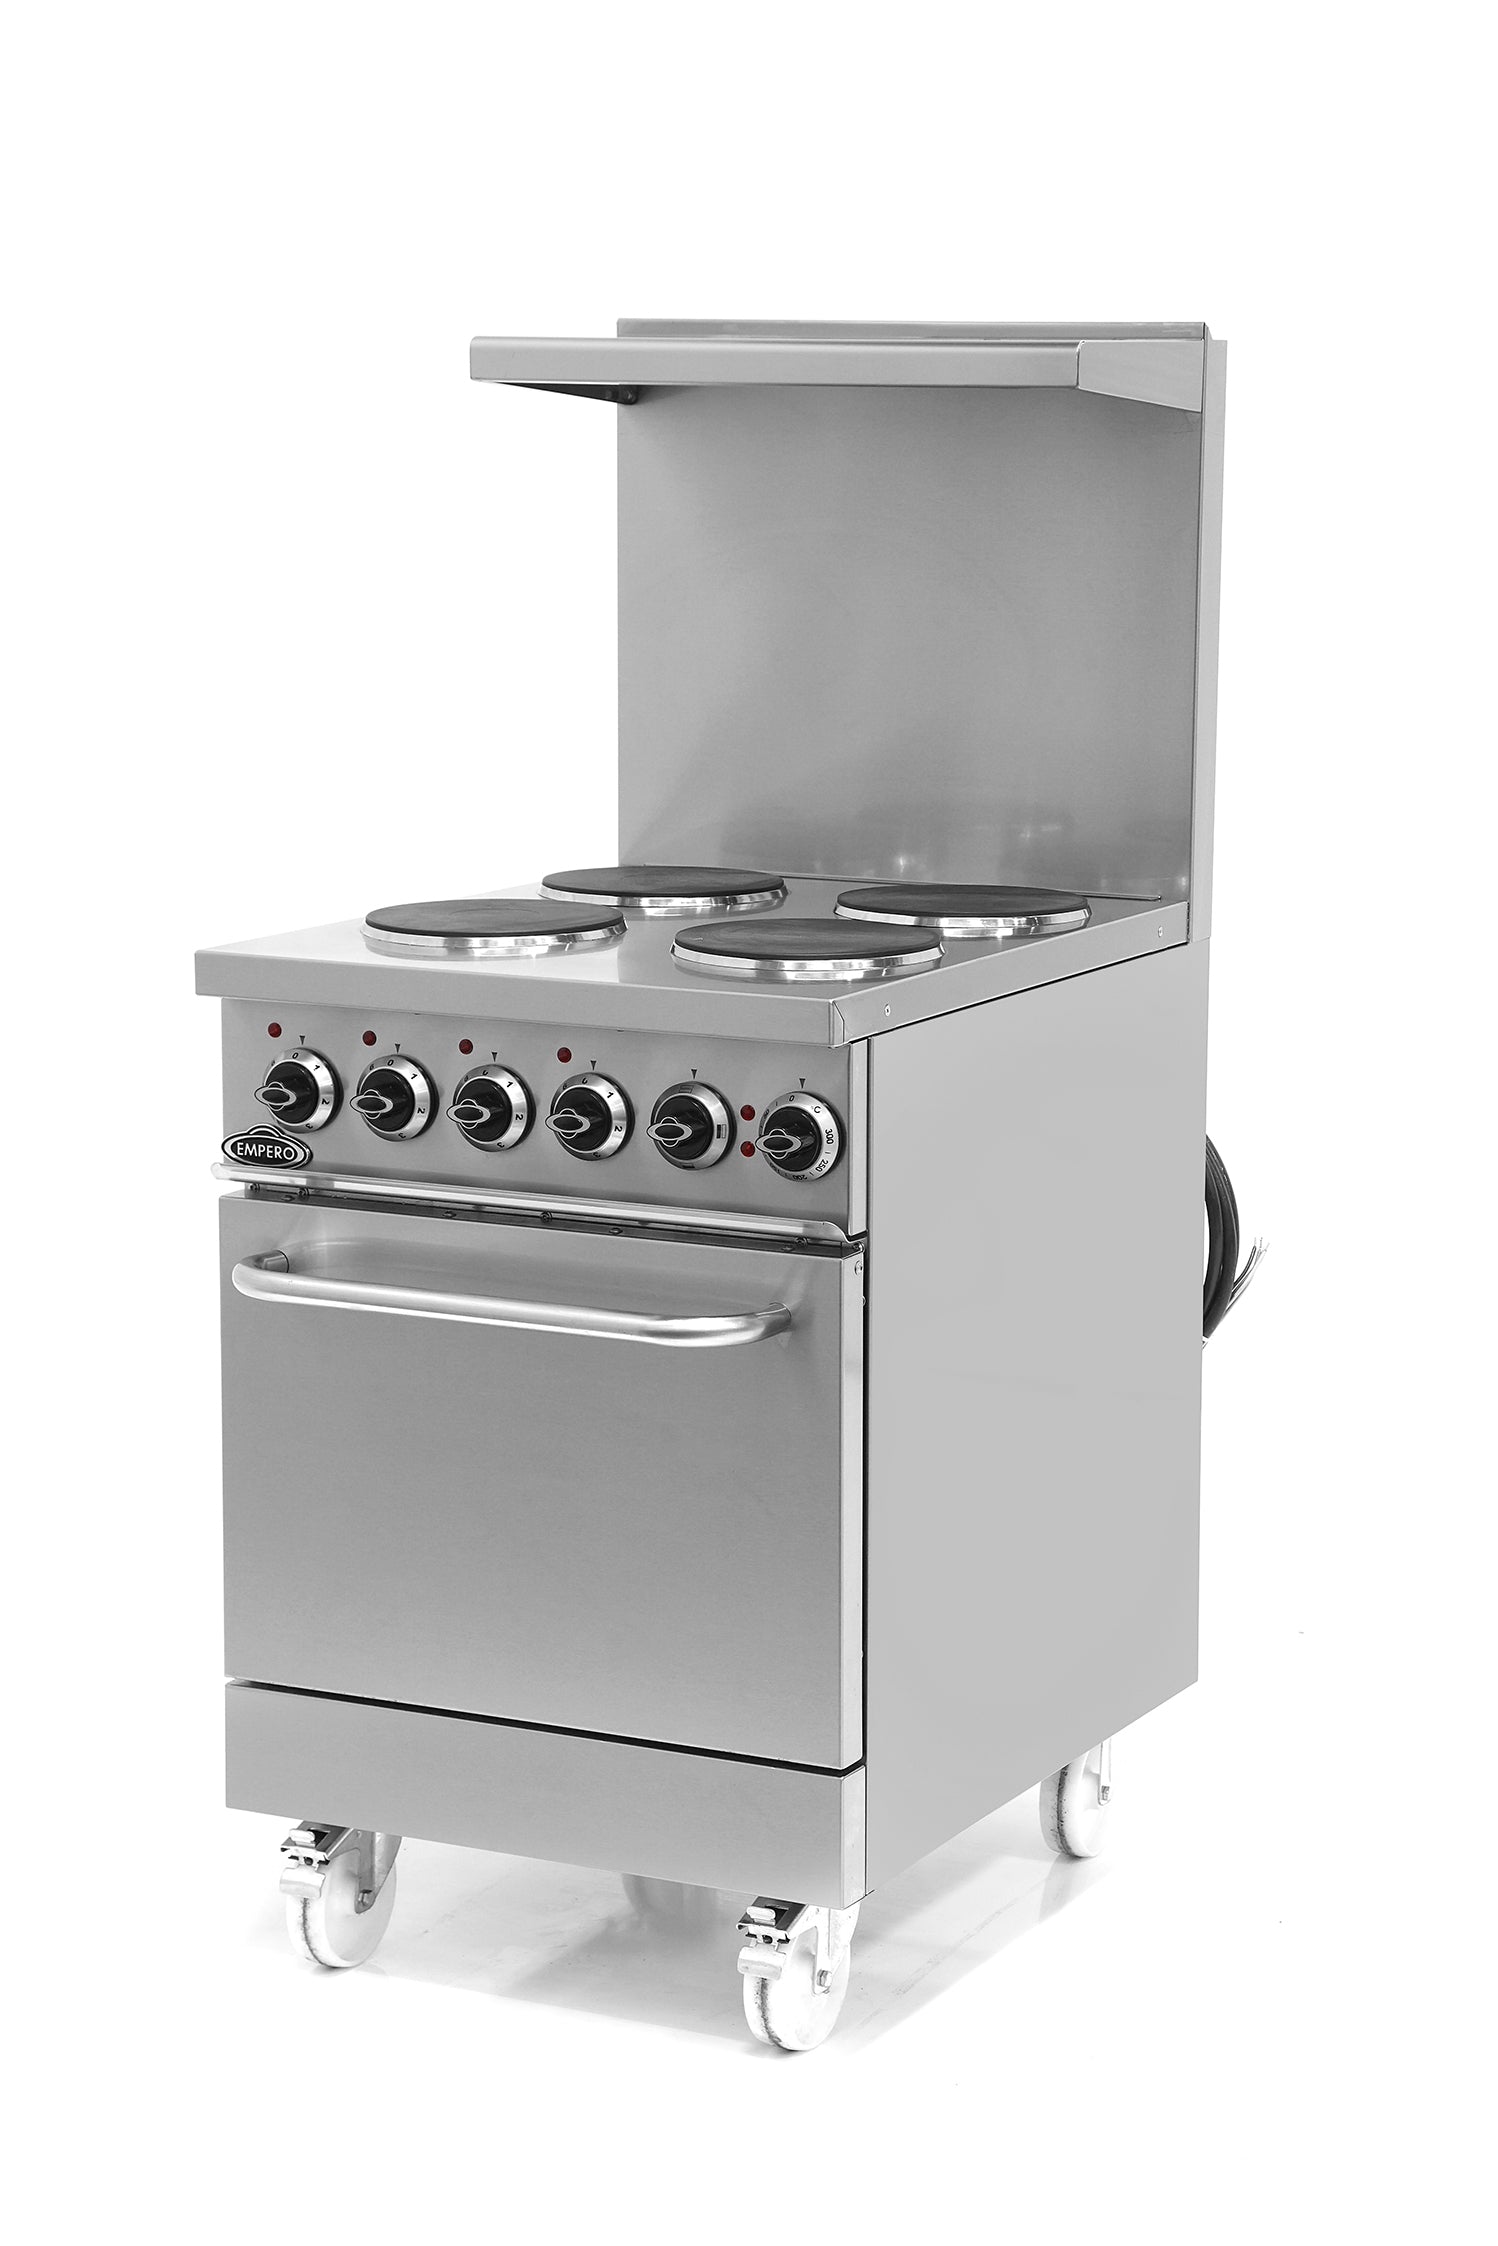 Pegasus R-36E 36″ Electric Range with 6 Round Plates and Standard Oven